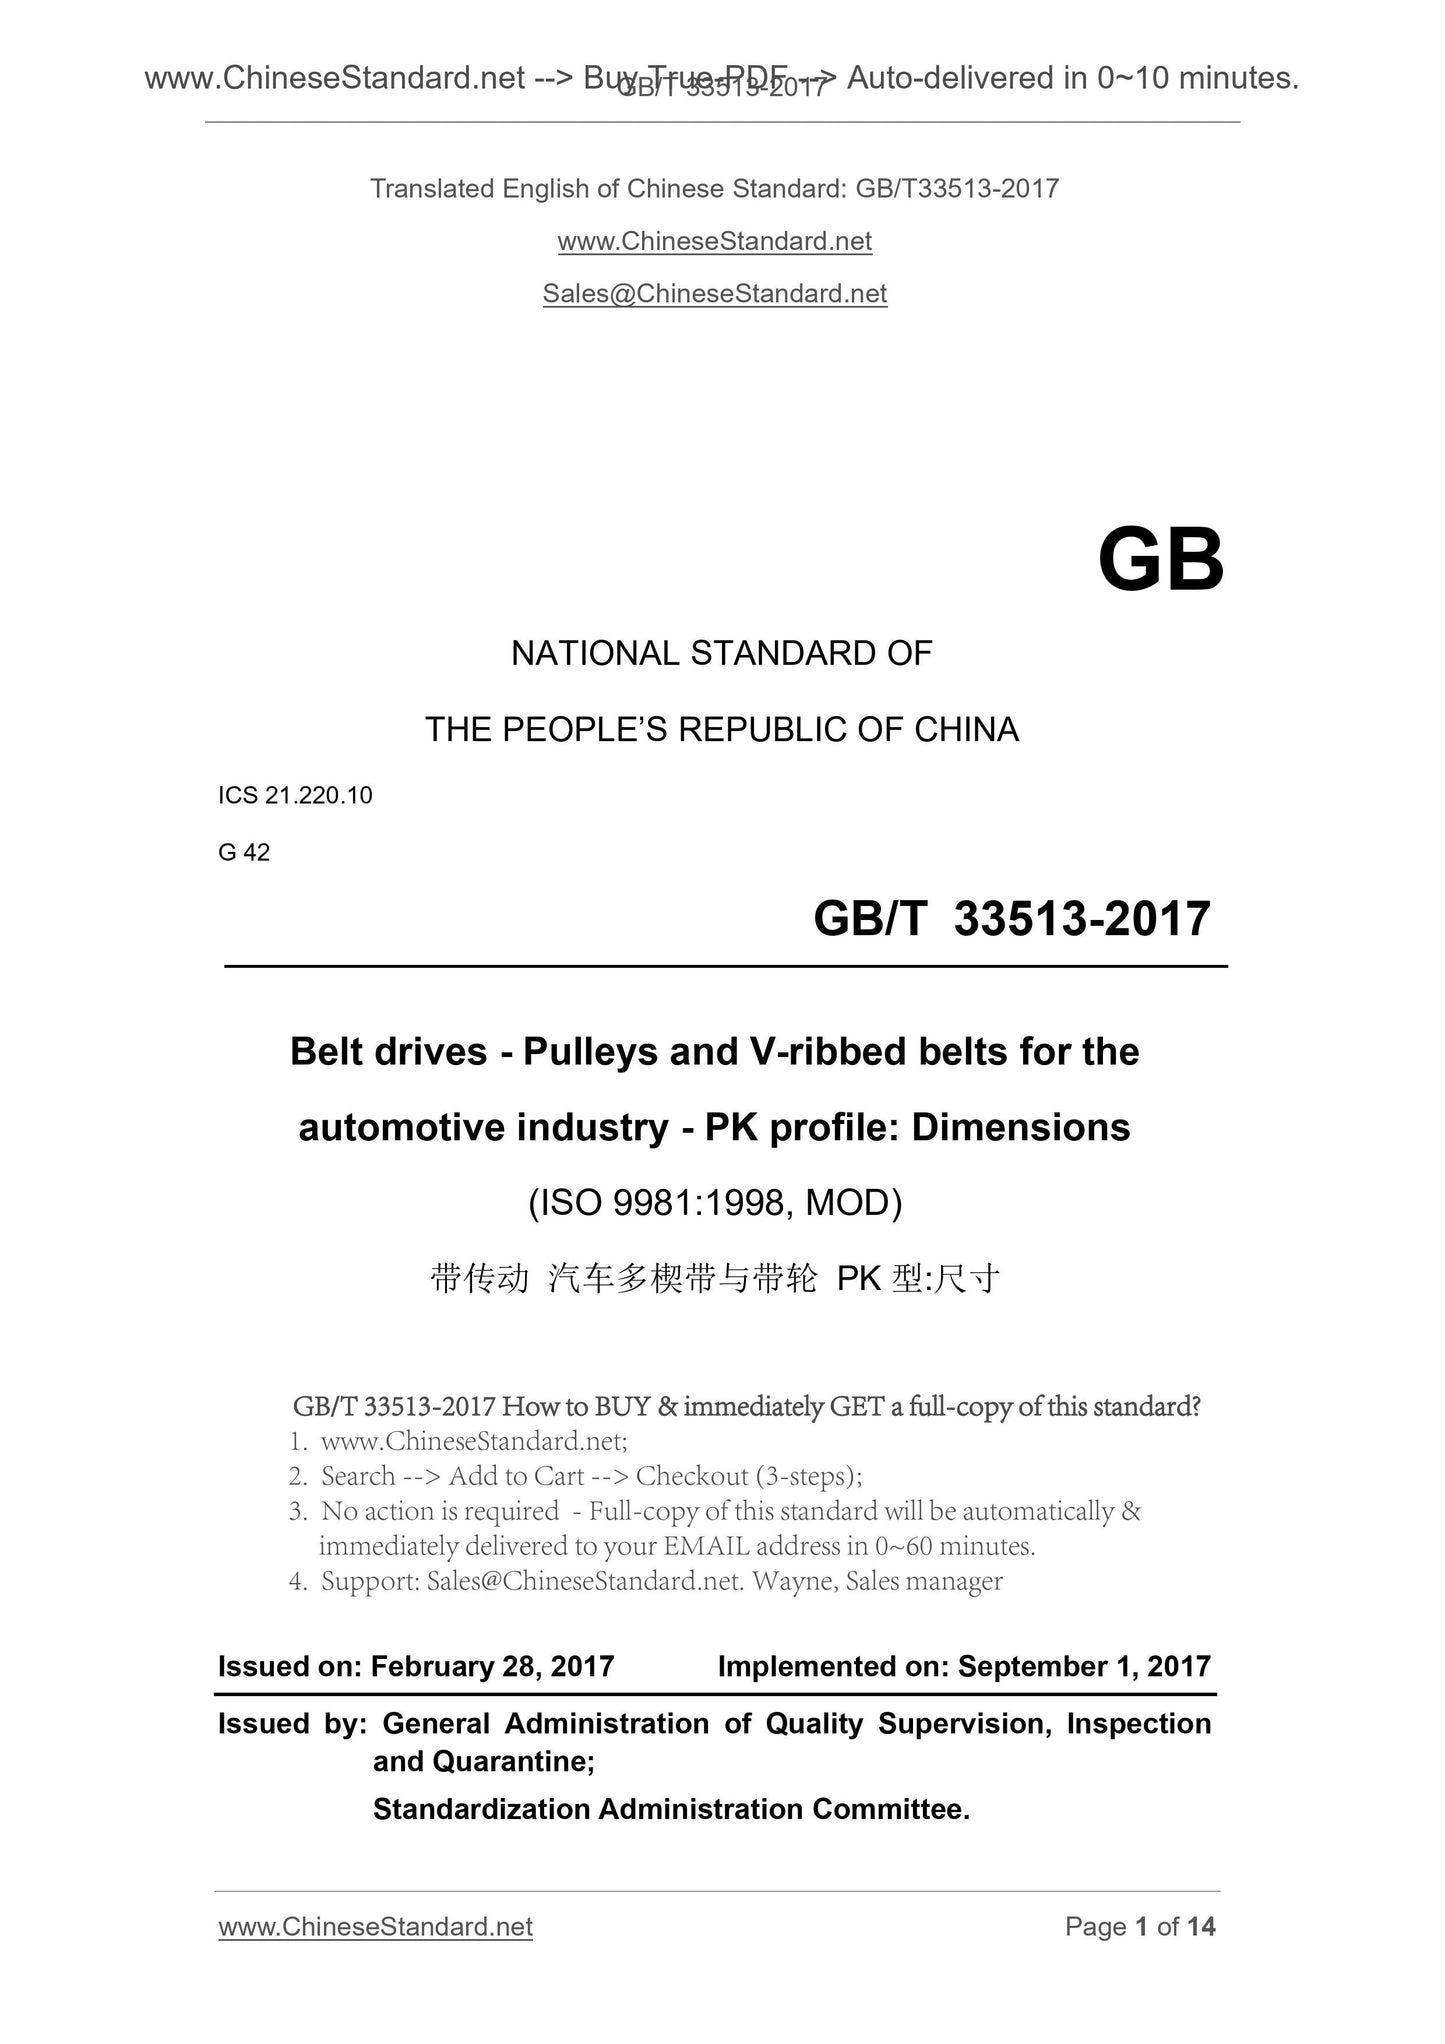 GB/T 33513-2017 Page 1